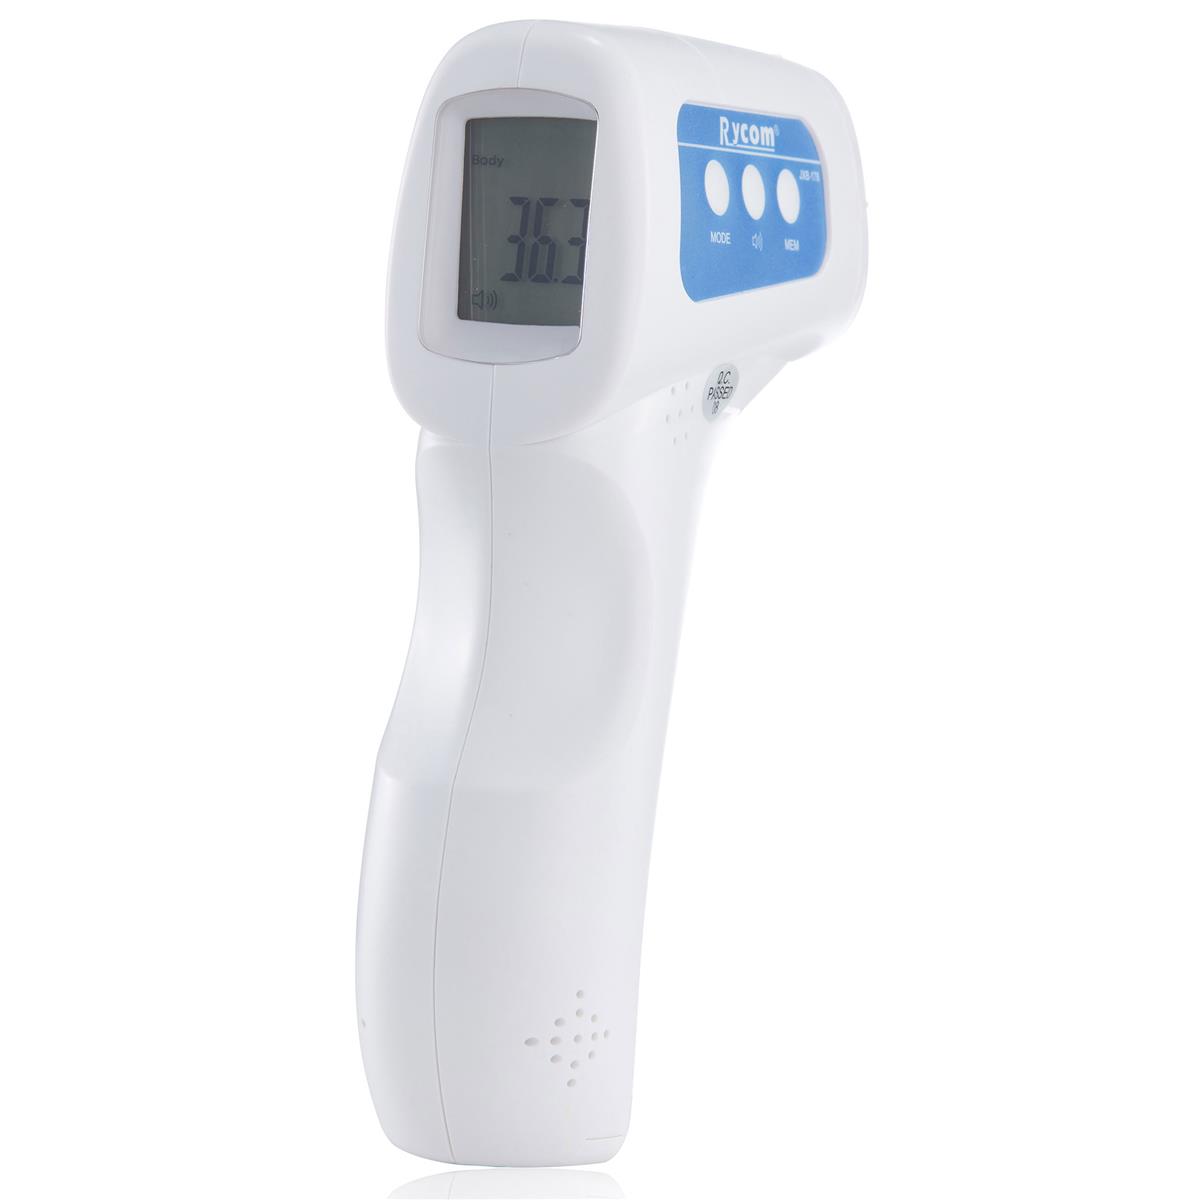 Image of Vanguard Veridian Health Care Non-Contact Infrared Thermometer